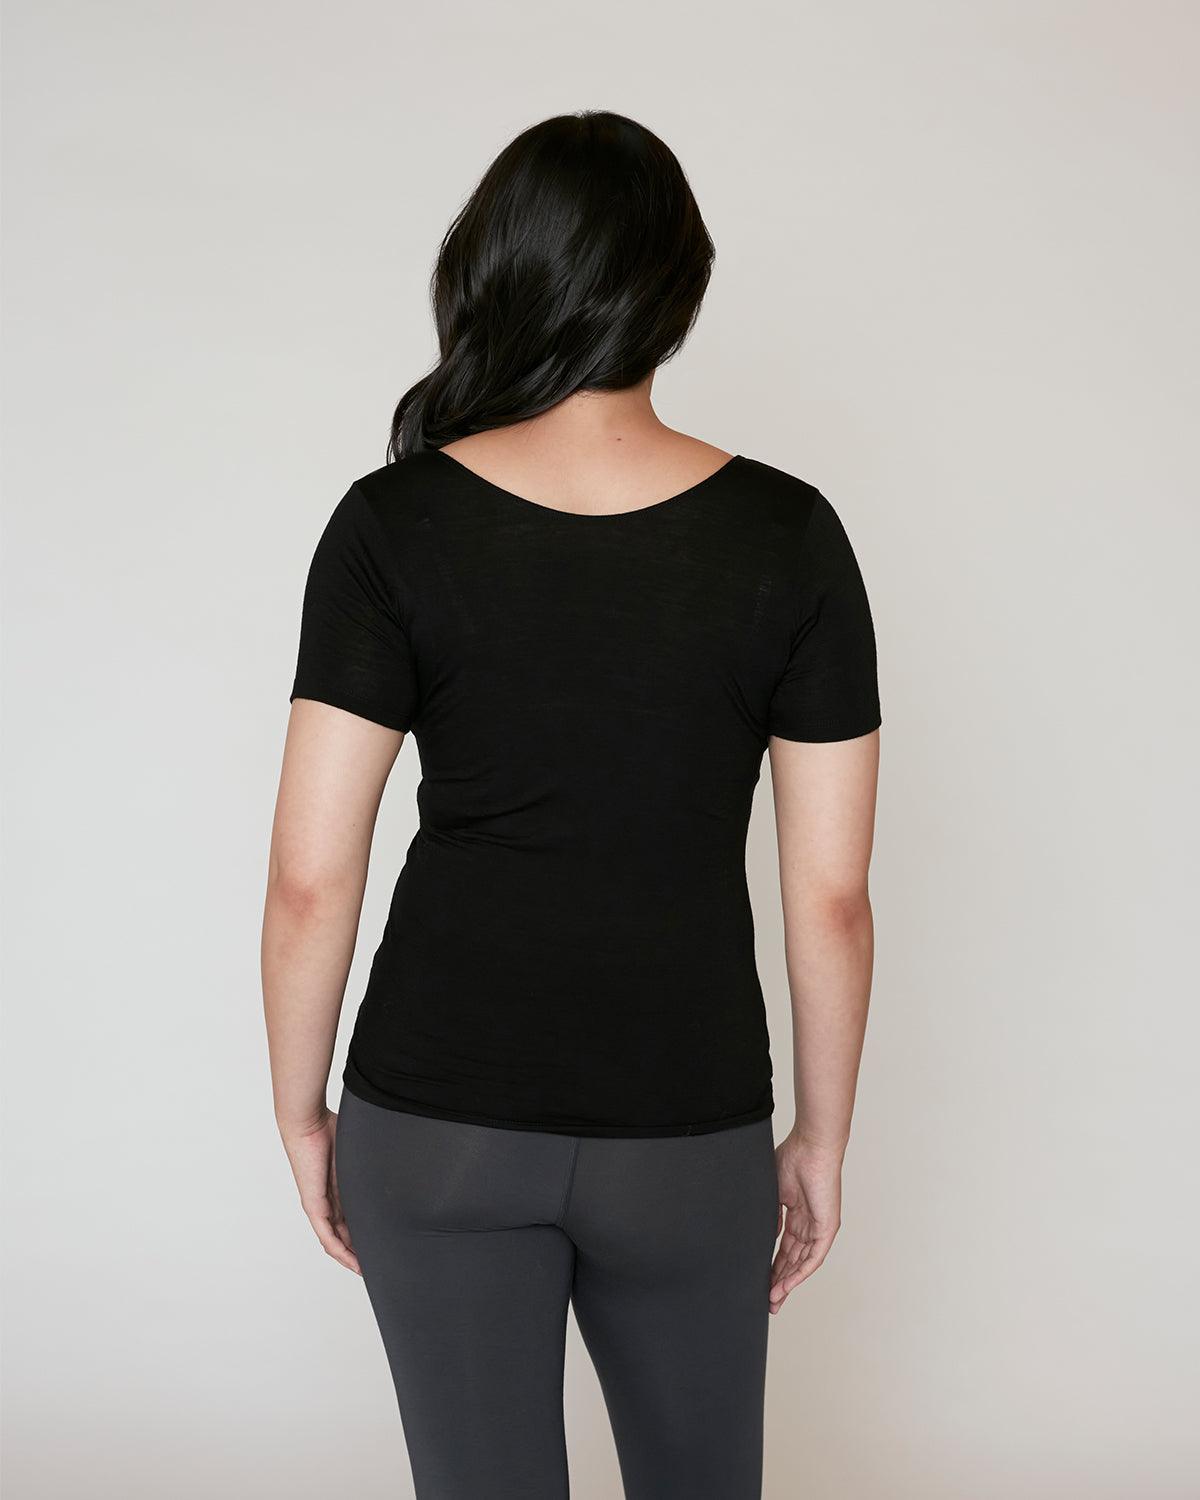 "#color_BLACK| Emi is 5'7.5", wearing a size S